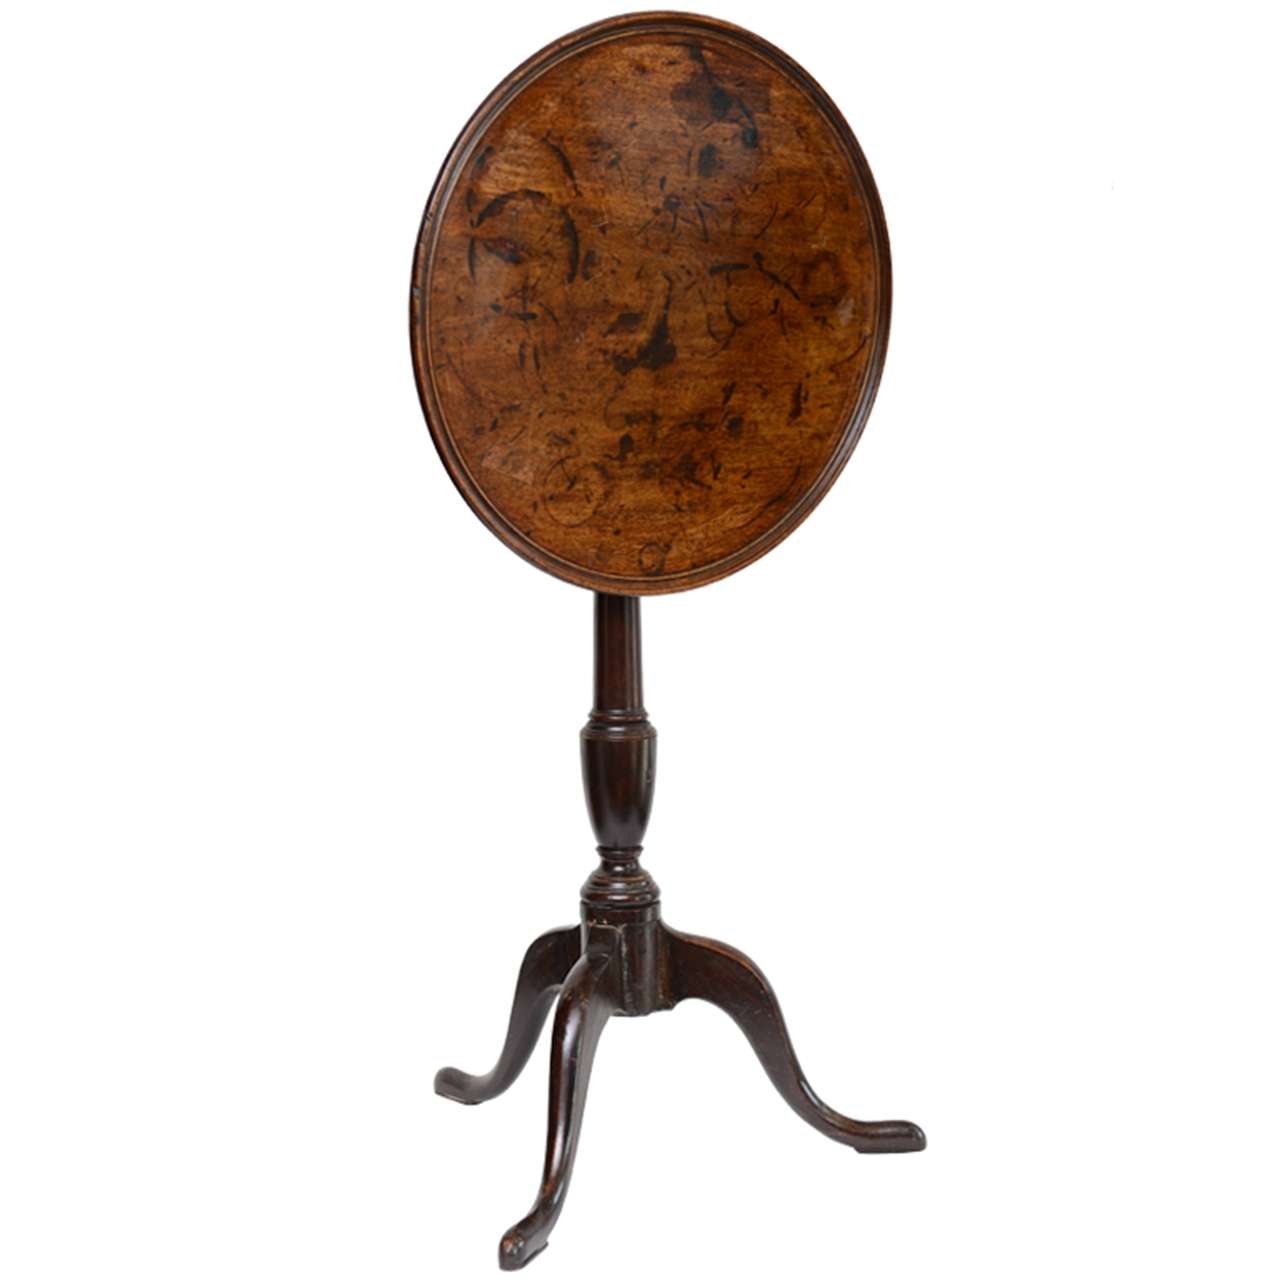 American Queen Anne Tilt-top Table/candle Stand, 18th Century